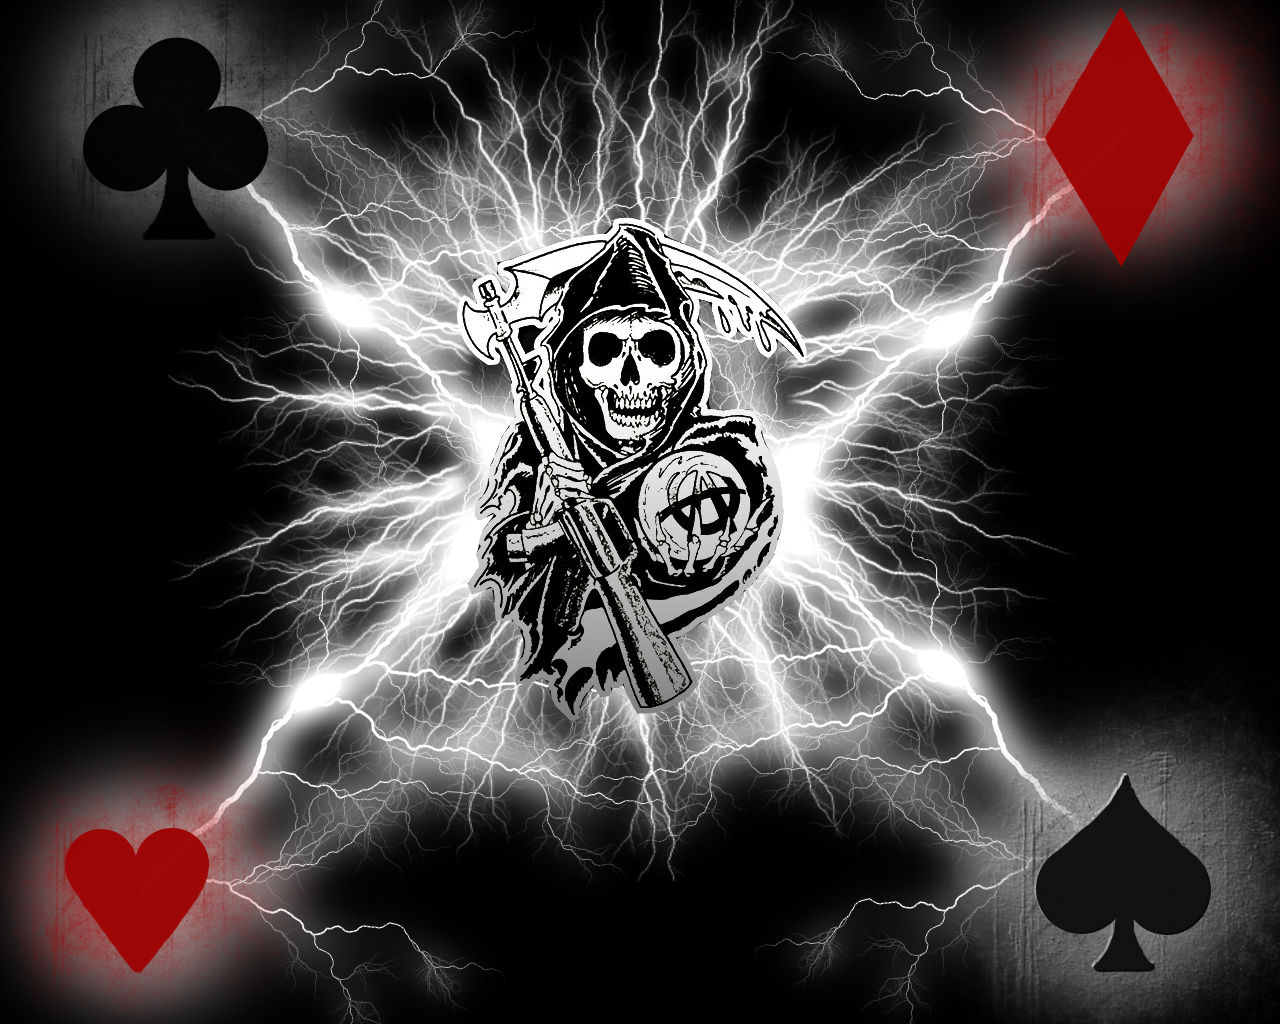 Sons Of Anarchy Background